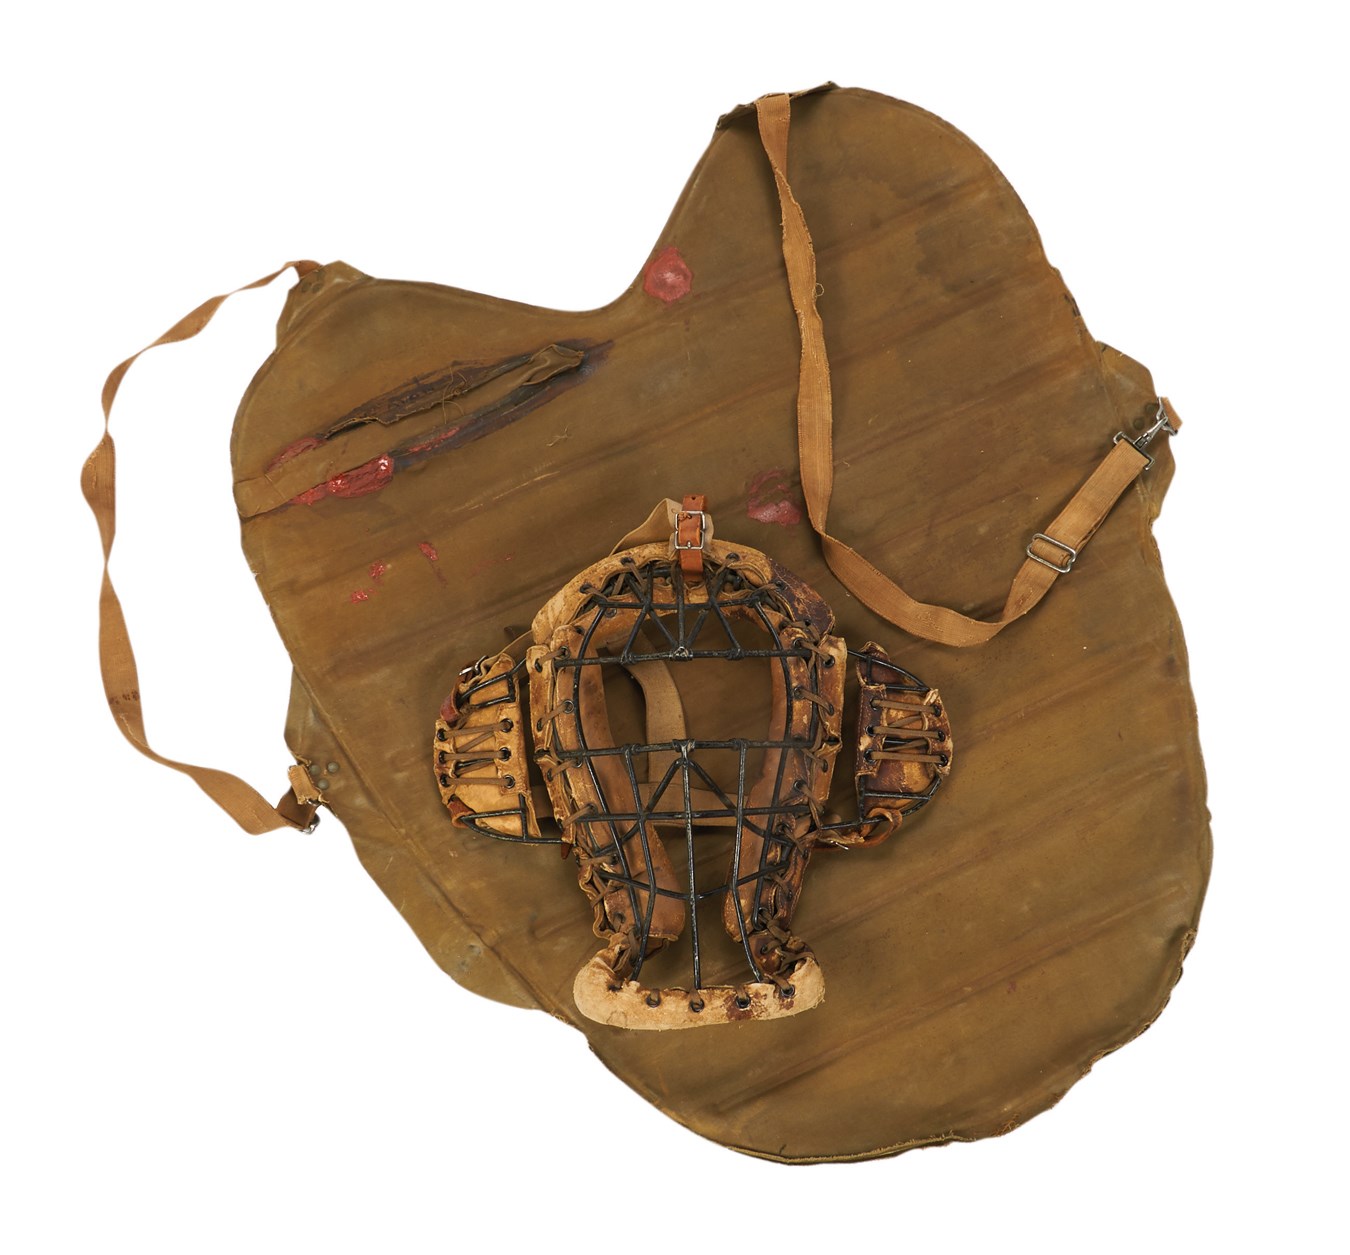 Very Rare Circa 1910s Umpire's Mask and Inflatable Chest Protector